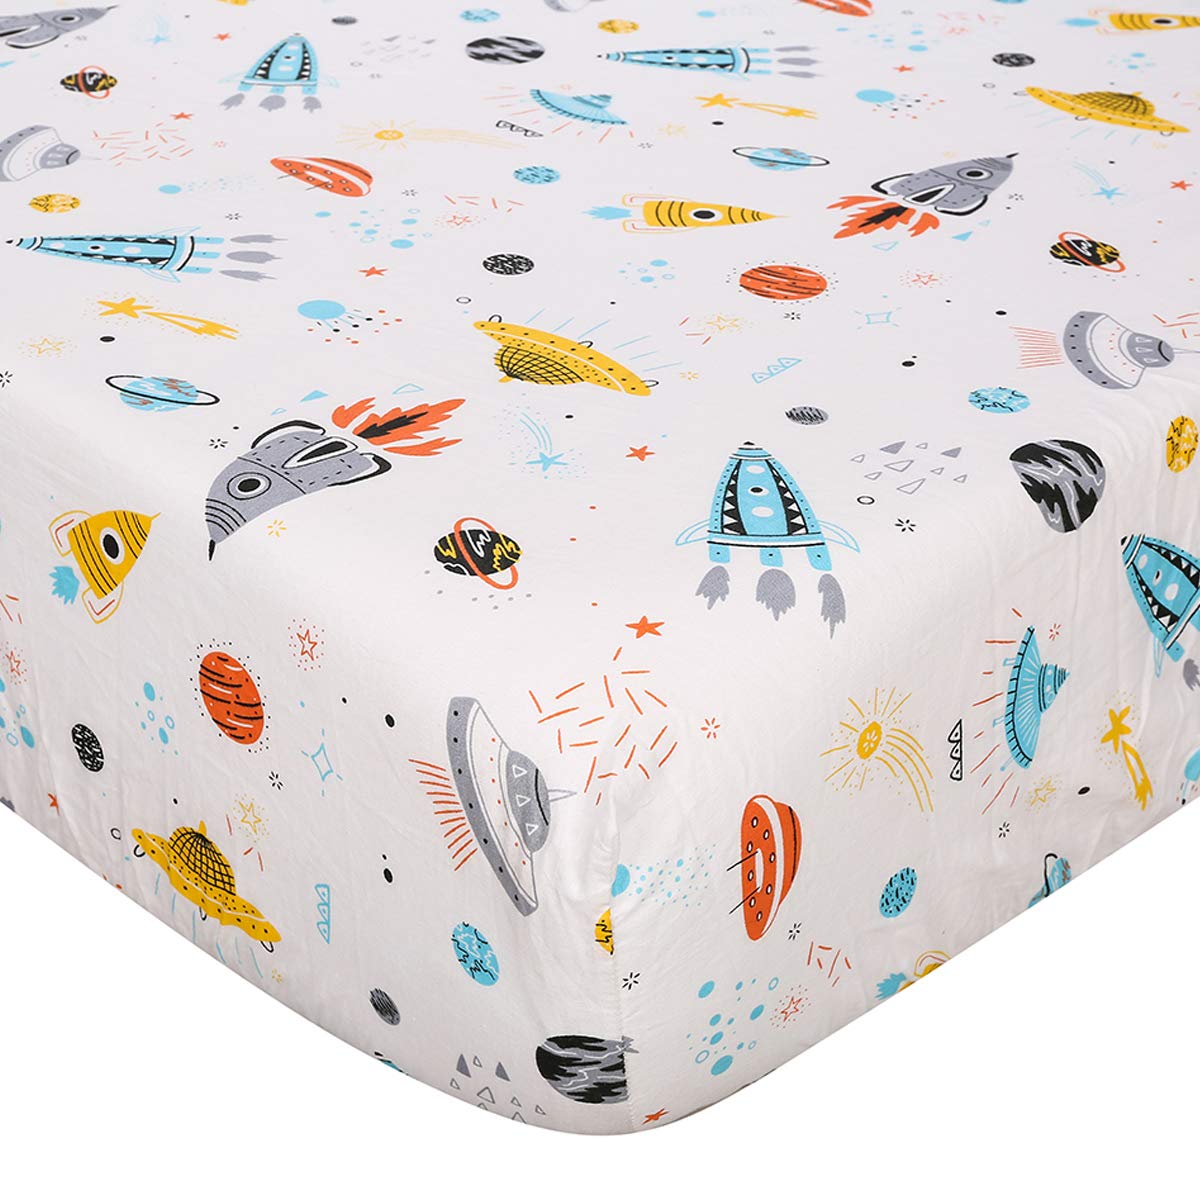 UOMNY Astronaut Space Galaxy Baby Crib Sheet Outerspace Adventures 100 Soft Breathable Microfiber Baby Sheet Fits Standard Size Crib M